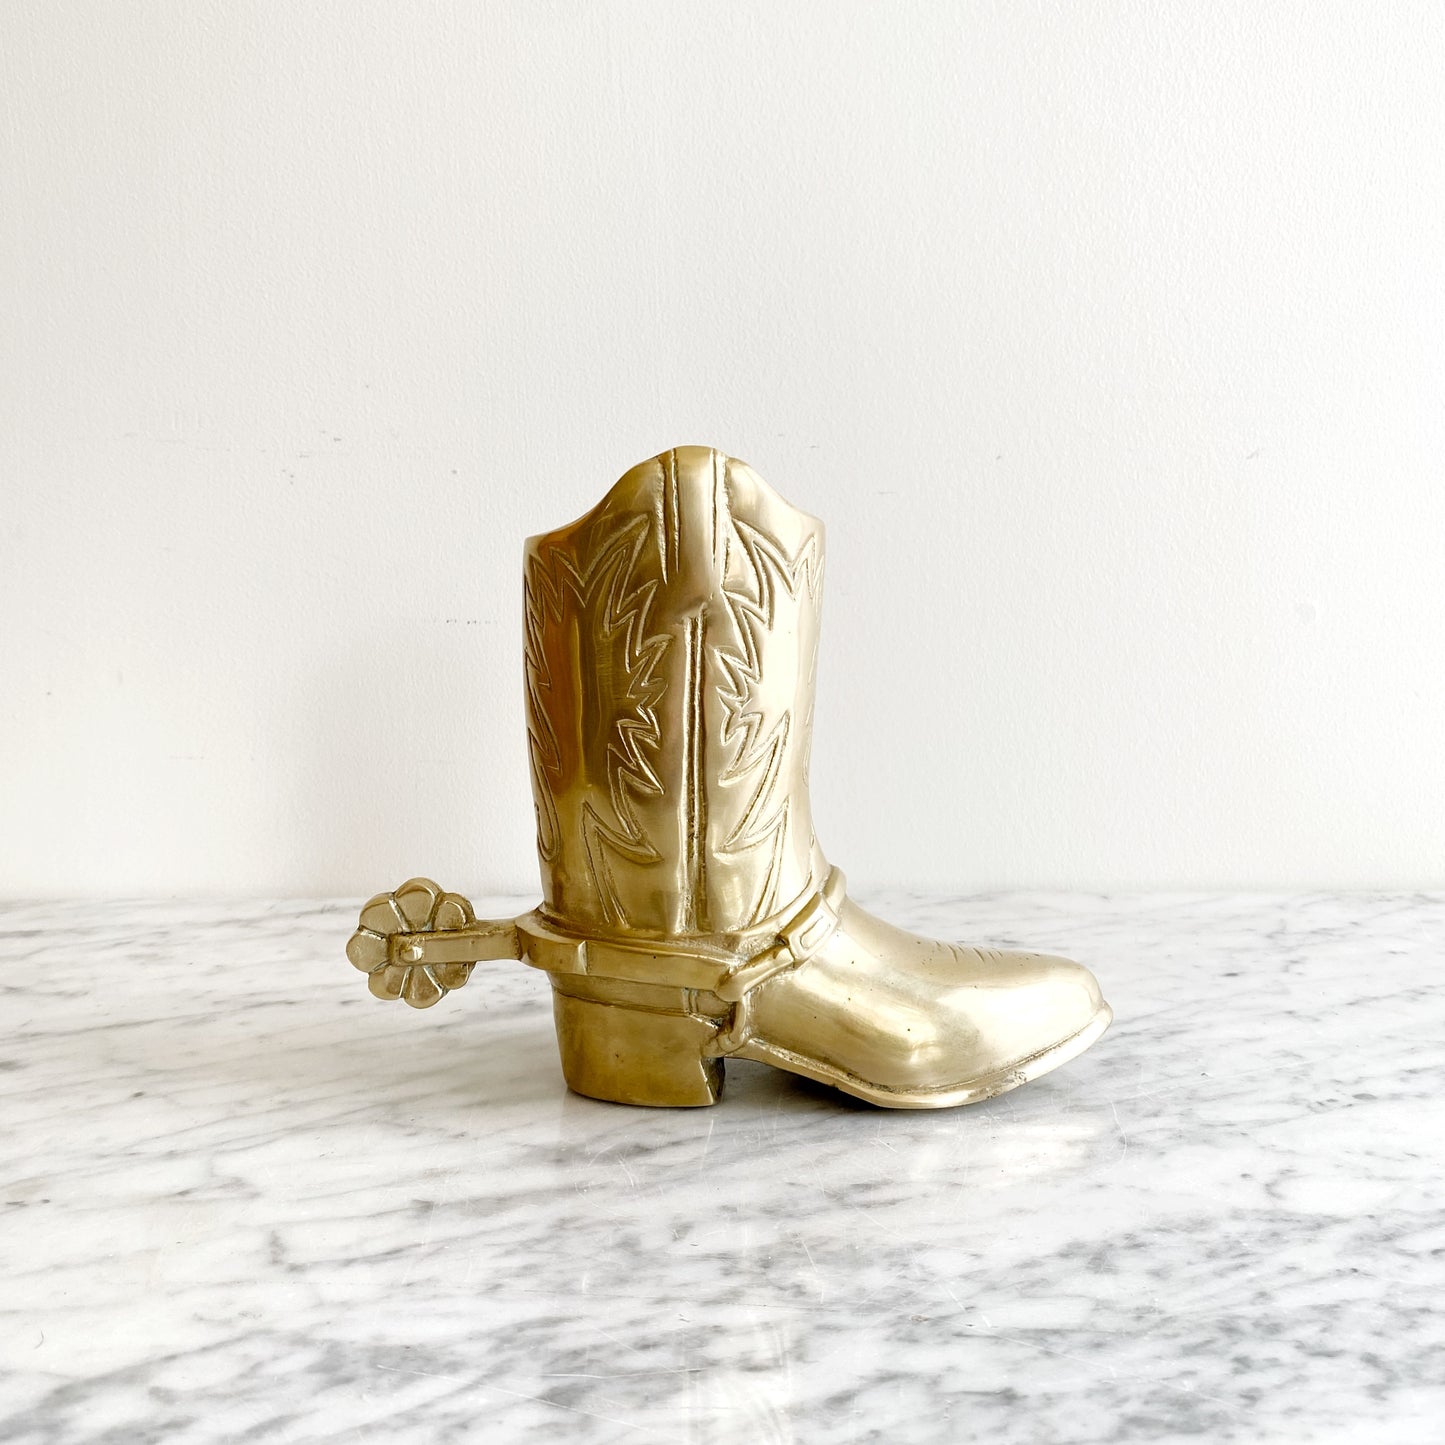 Vintage Brass Cowboy / Cowgirl Boot, 6.75"